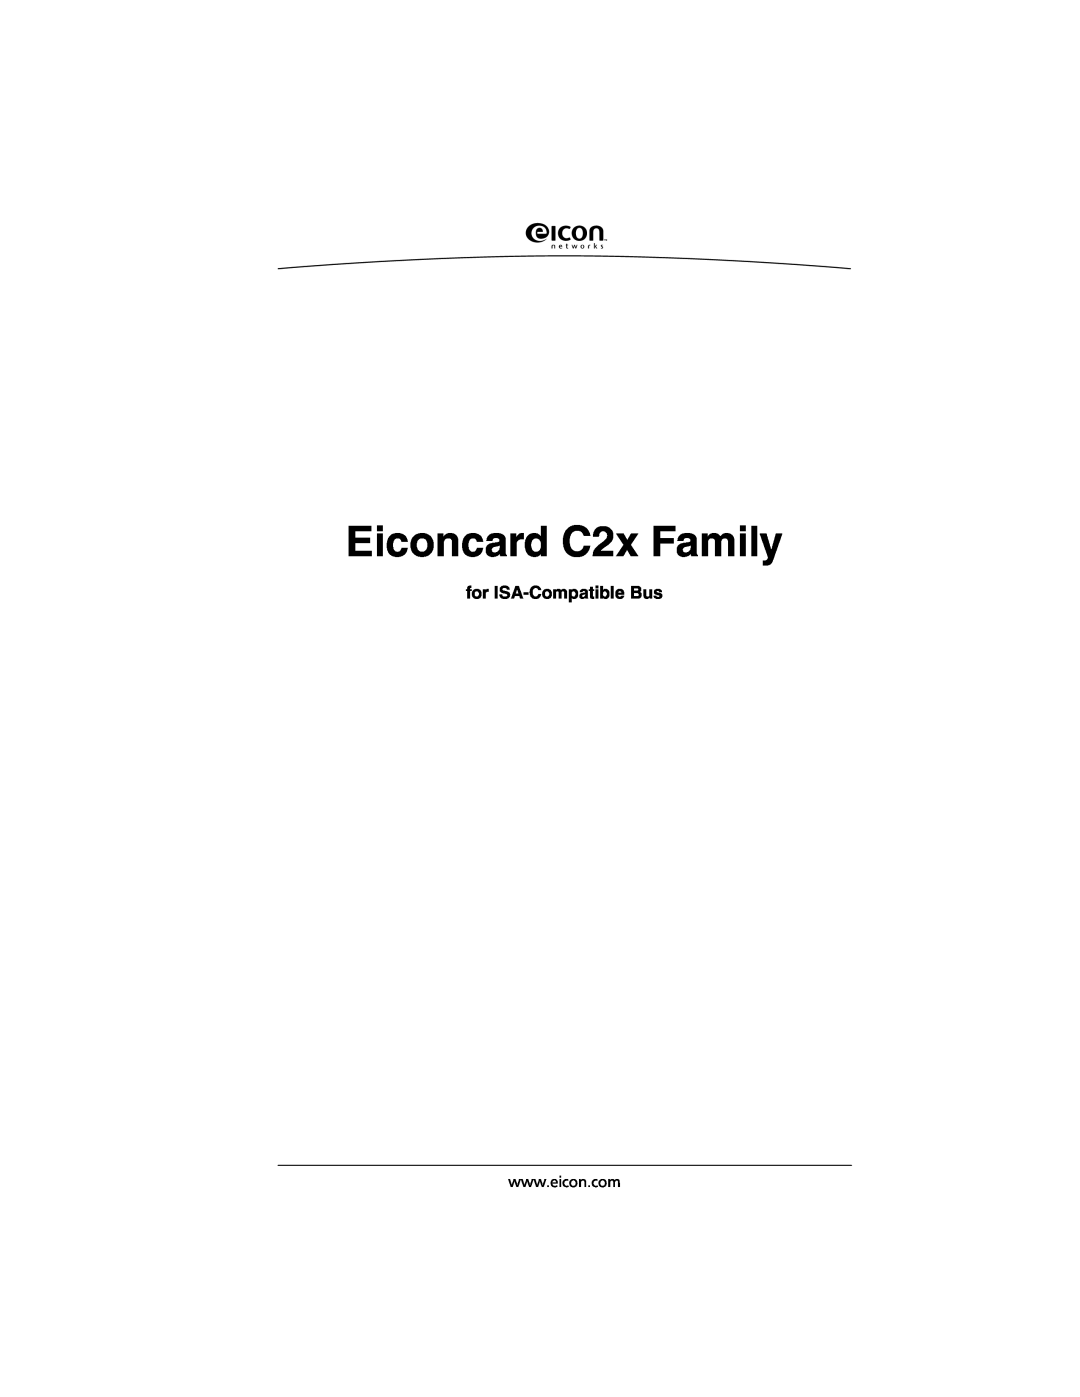 Eicon Networks manual Eiconcard C2x Family, for ISA-Compatible Bus 